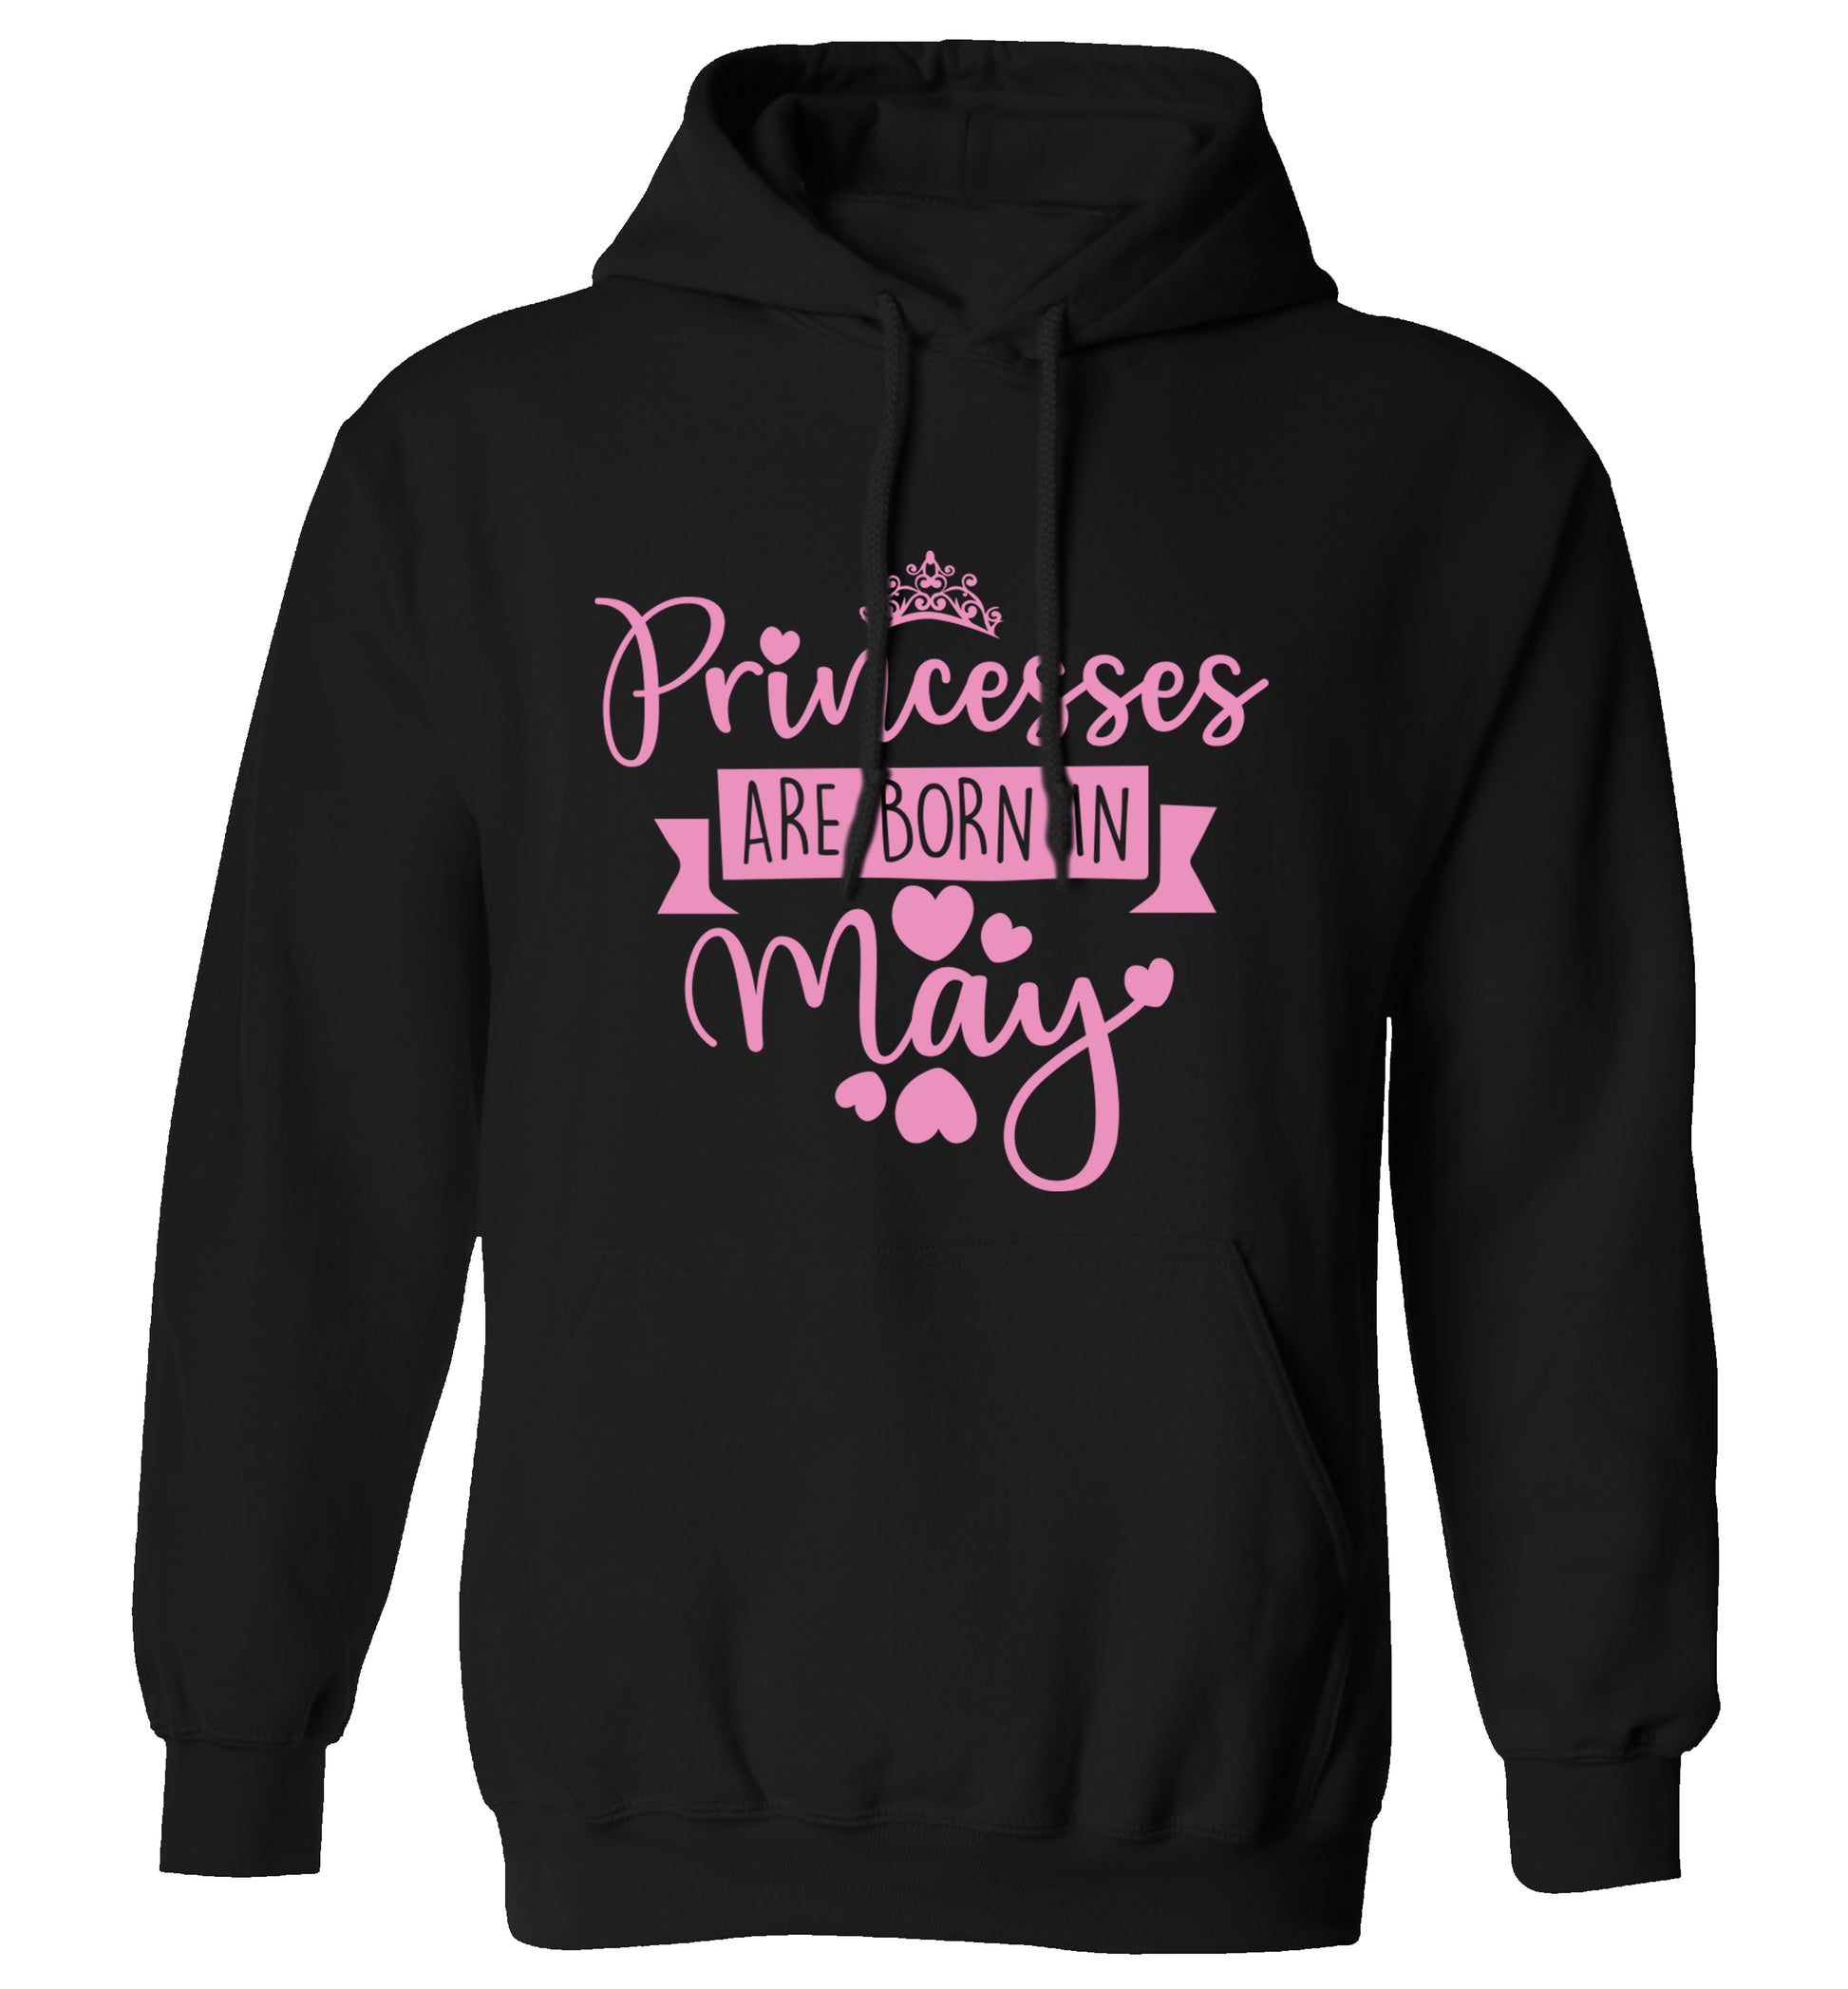 Princesses are born in May adults unisex black hoodie 2XL